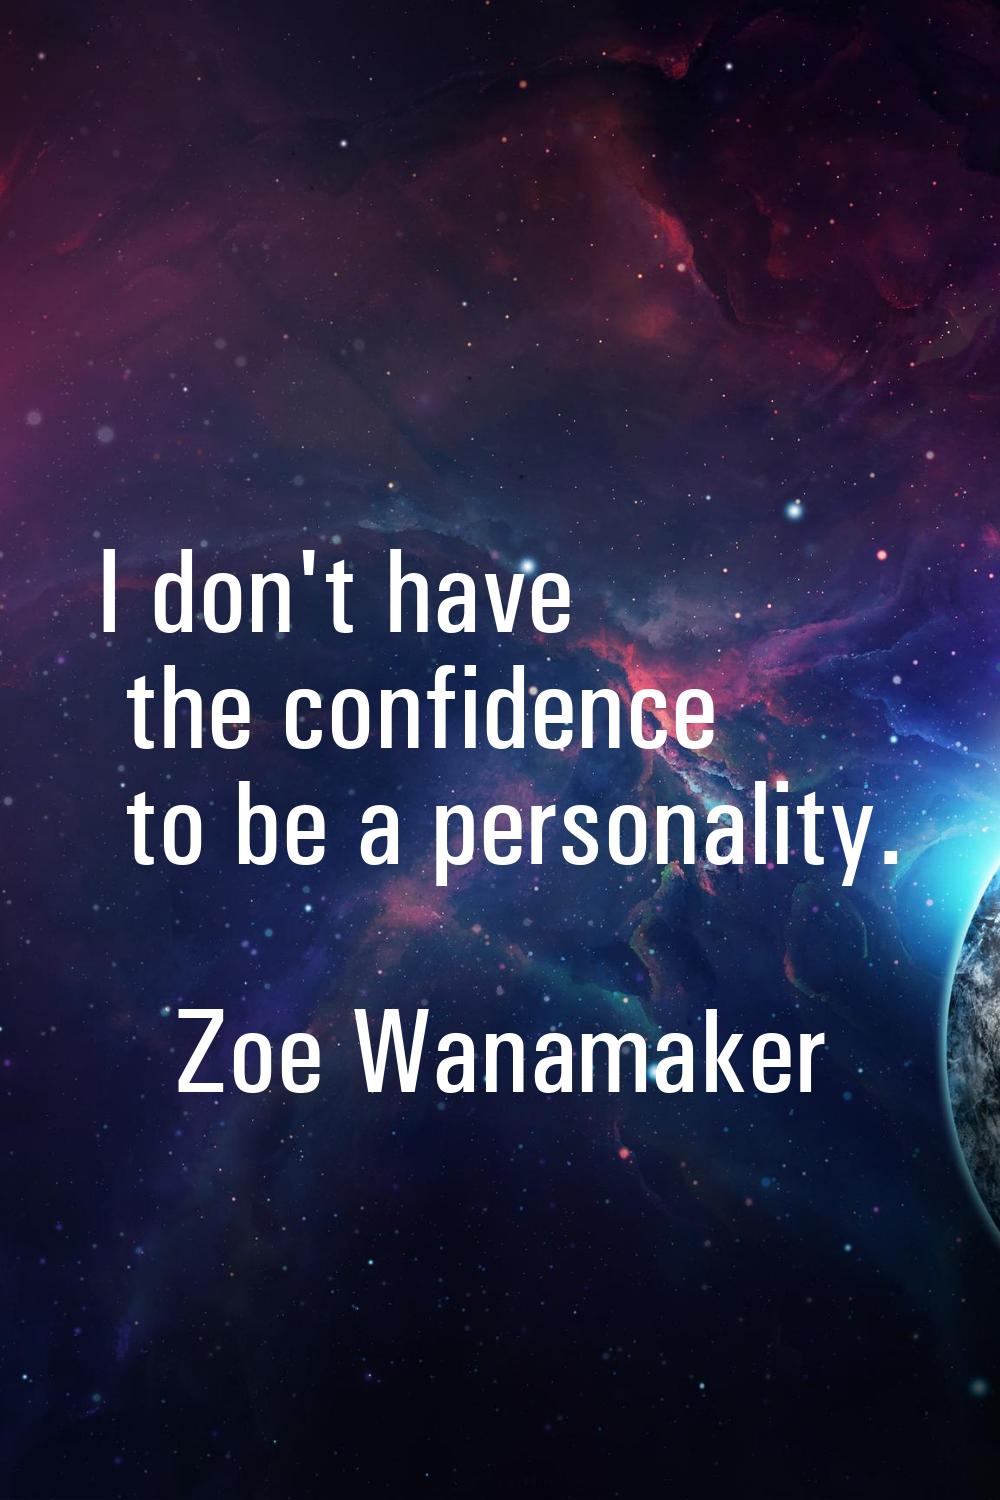 I don't have the confidence to be a personality.